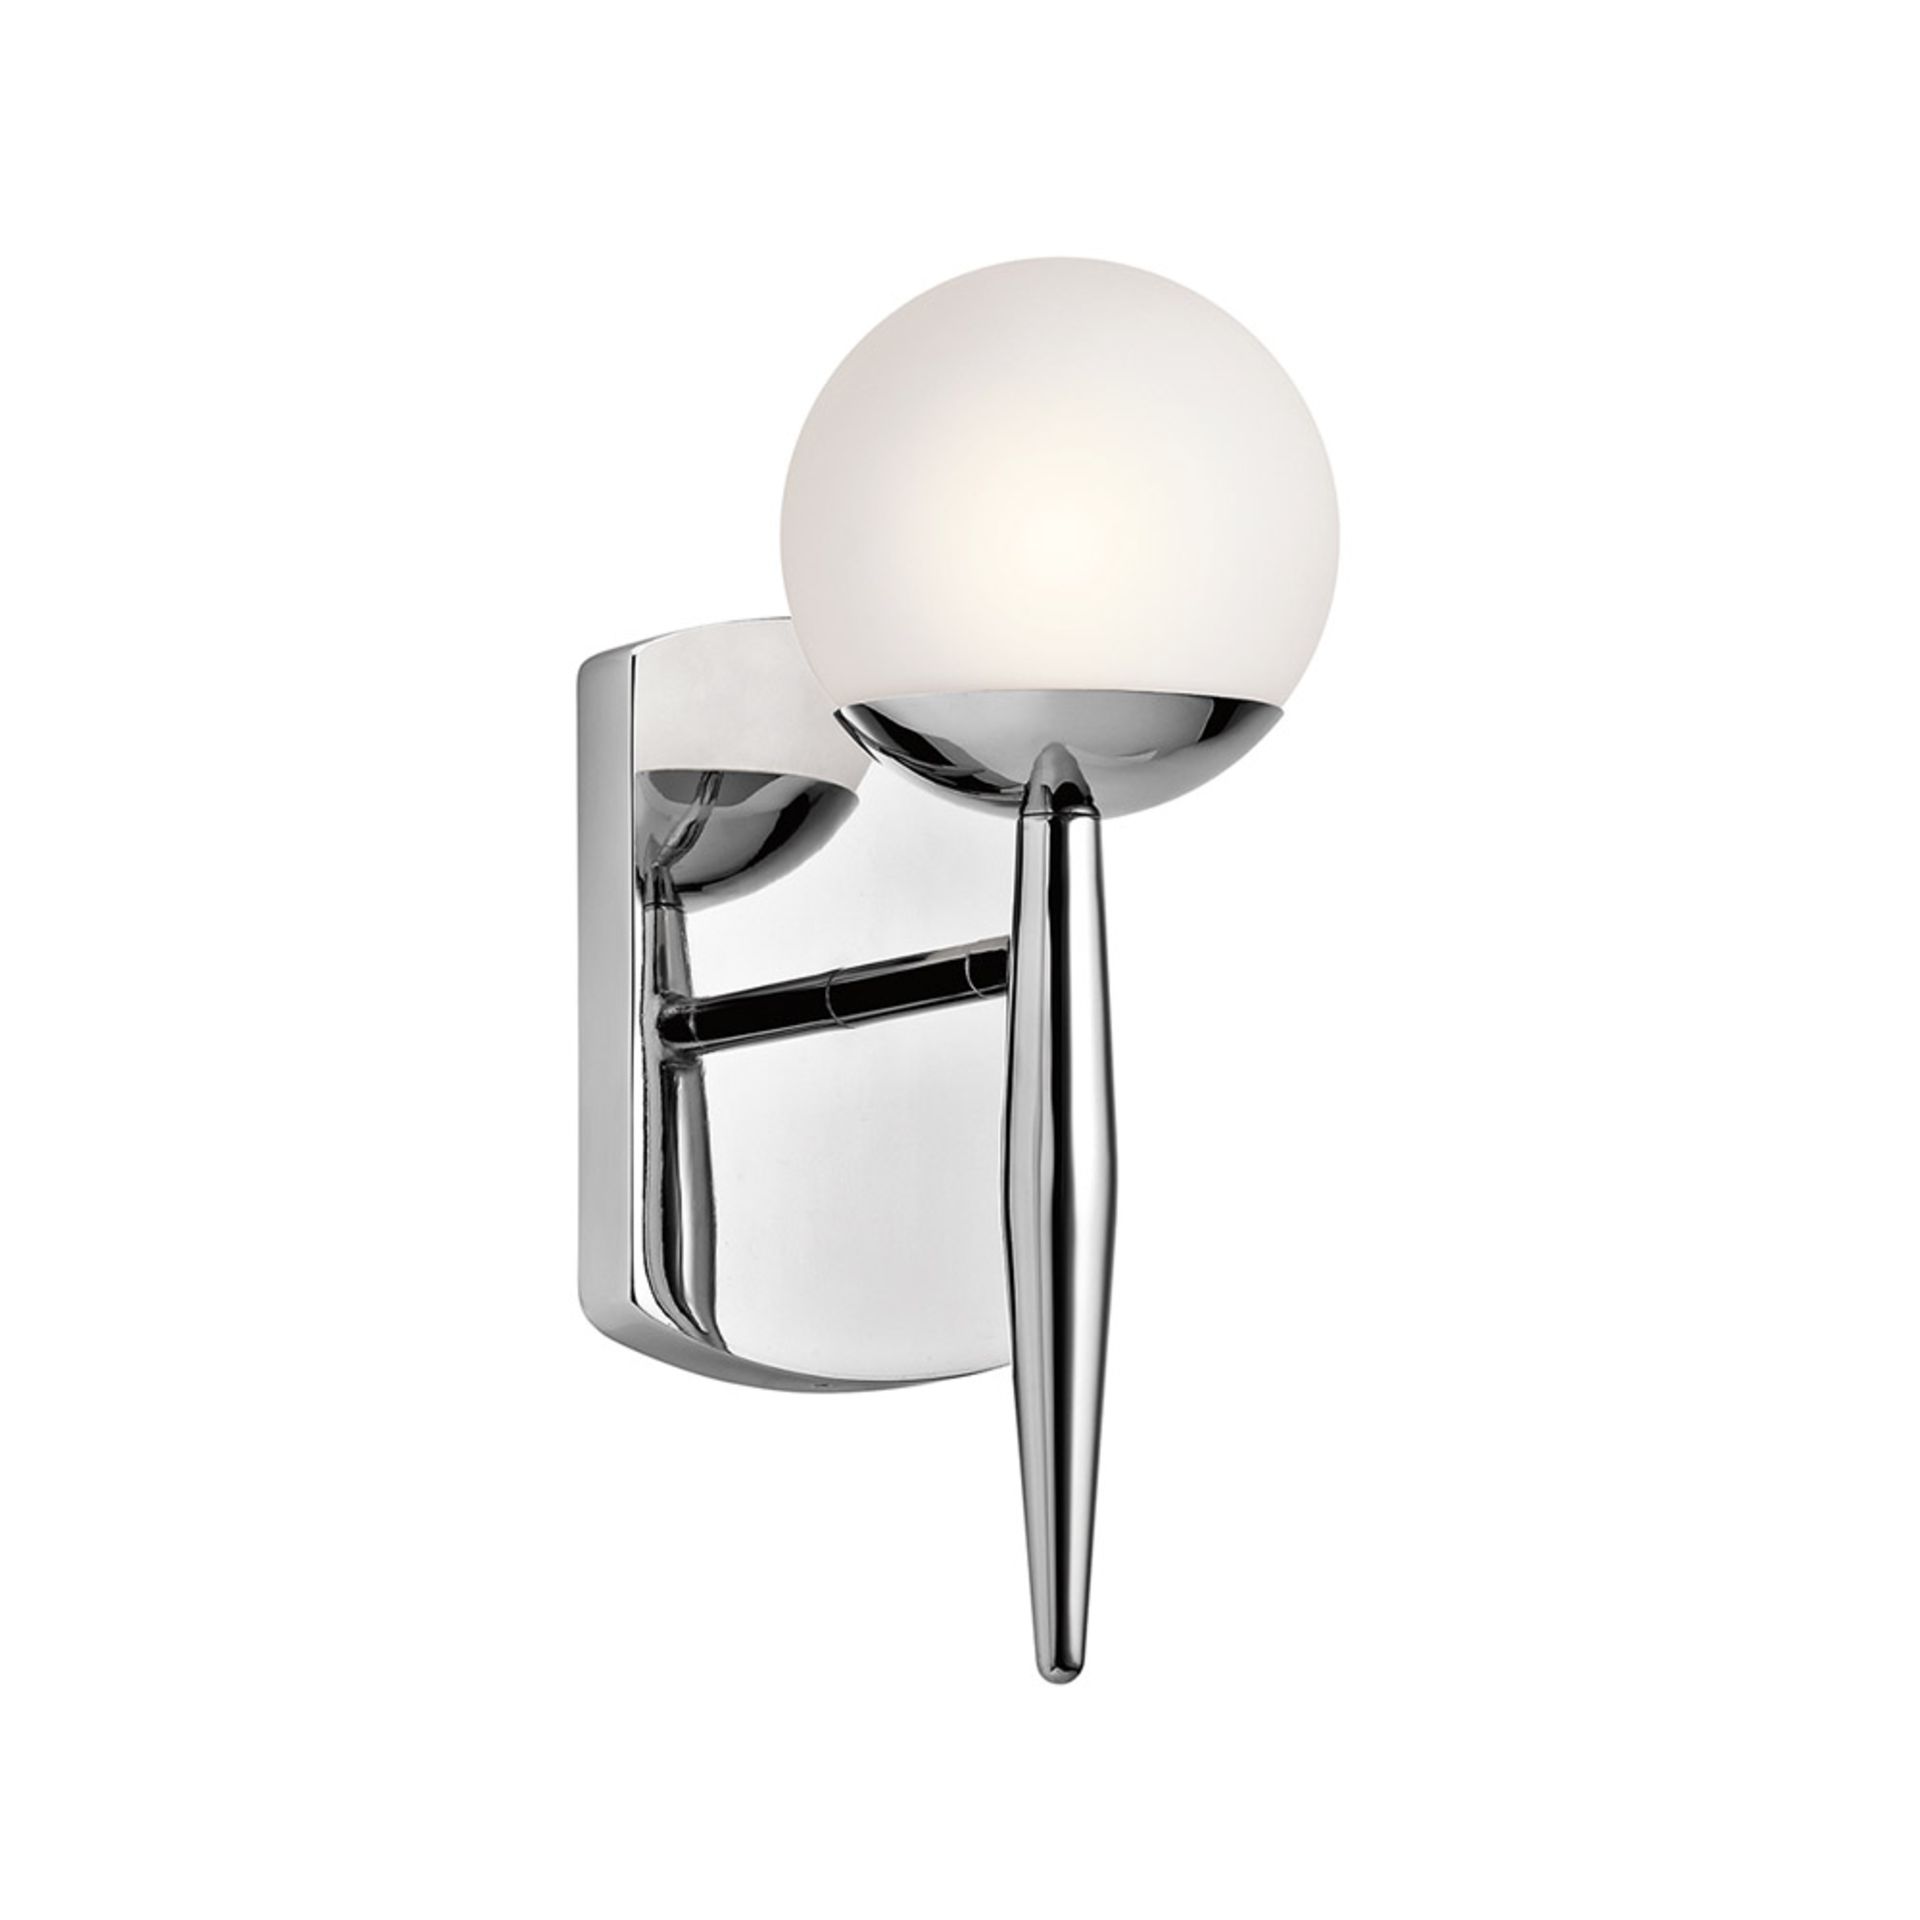 1 GRADE A / RRP £150.00 BOXED ELSTEAD JASPER BATHROOM WALL LIGHT IN CHROME (VIEWING AVAILABLE)